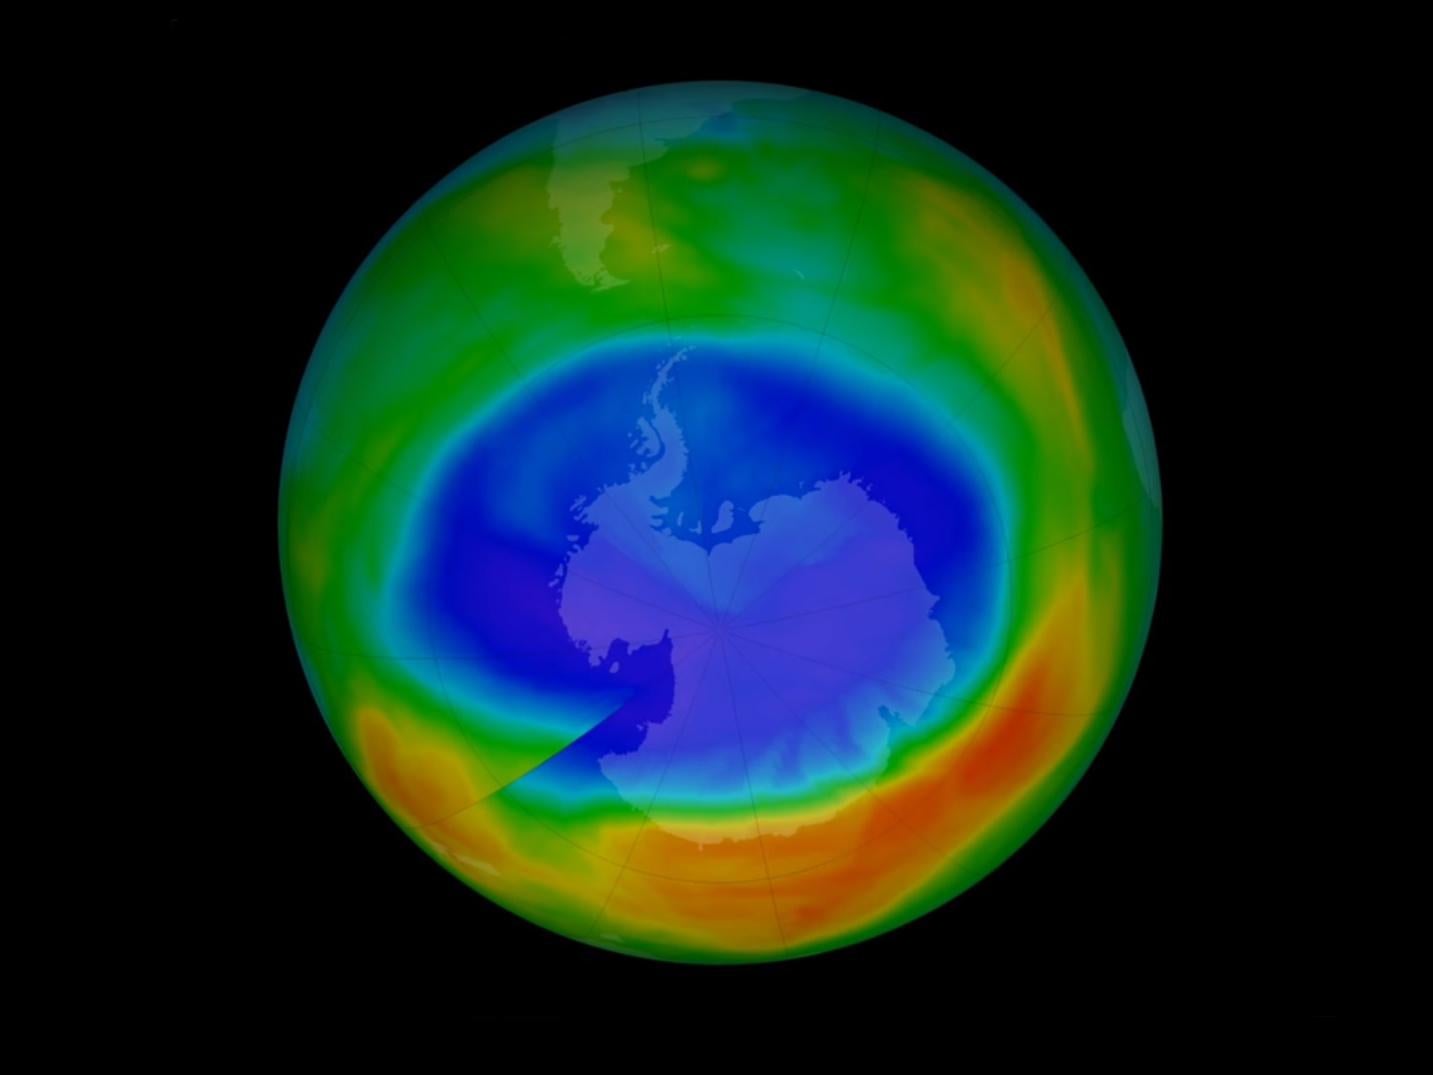 Satellite Observations Give First Direct Proof Ozone Hole Has Recovered Scientists Say The 5390